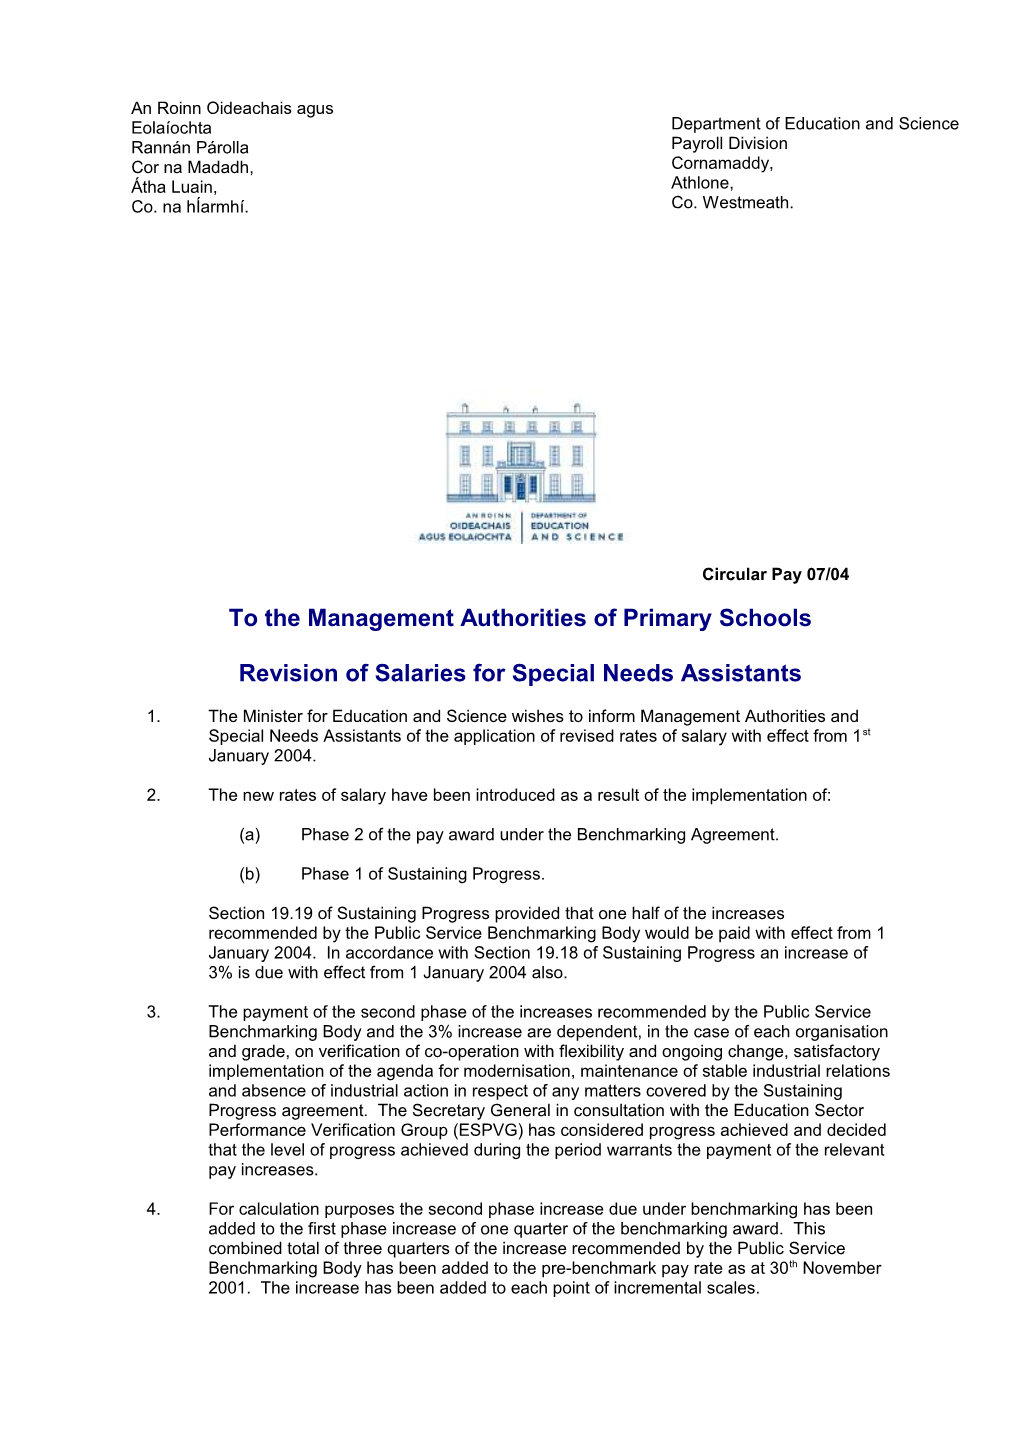 Circular 07/04 - Revision of Salaries for Special Needs Assistants - Primary (File Format